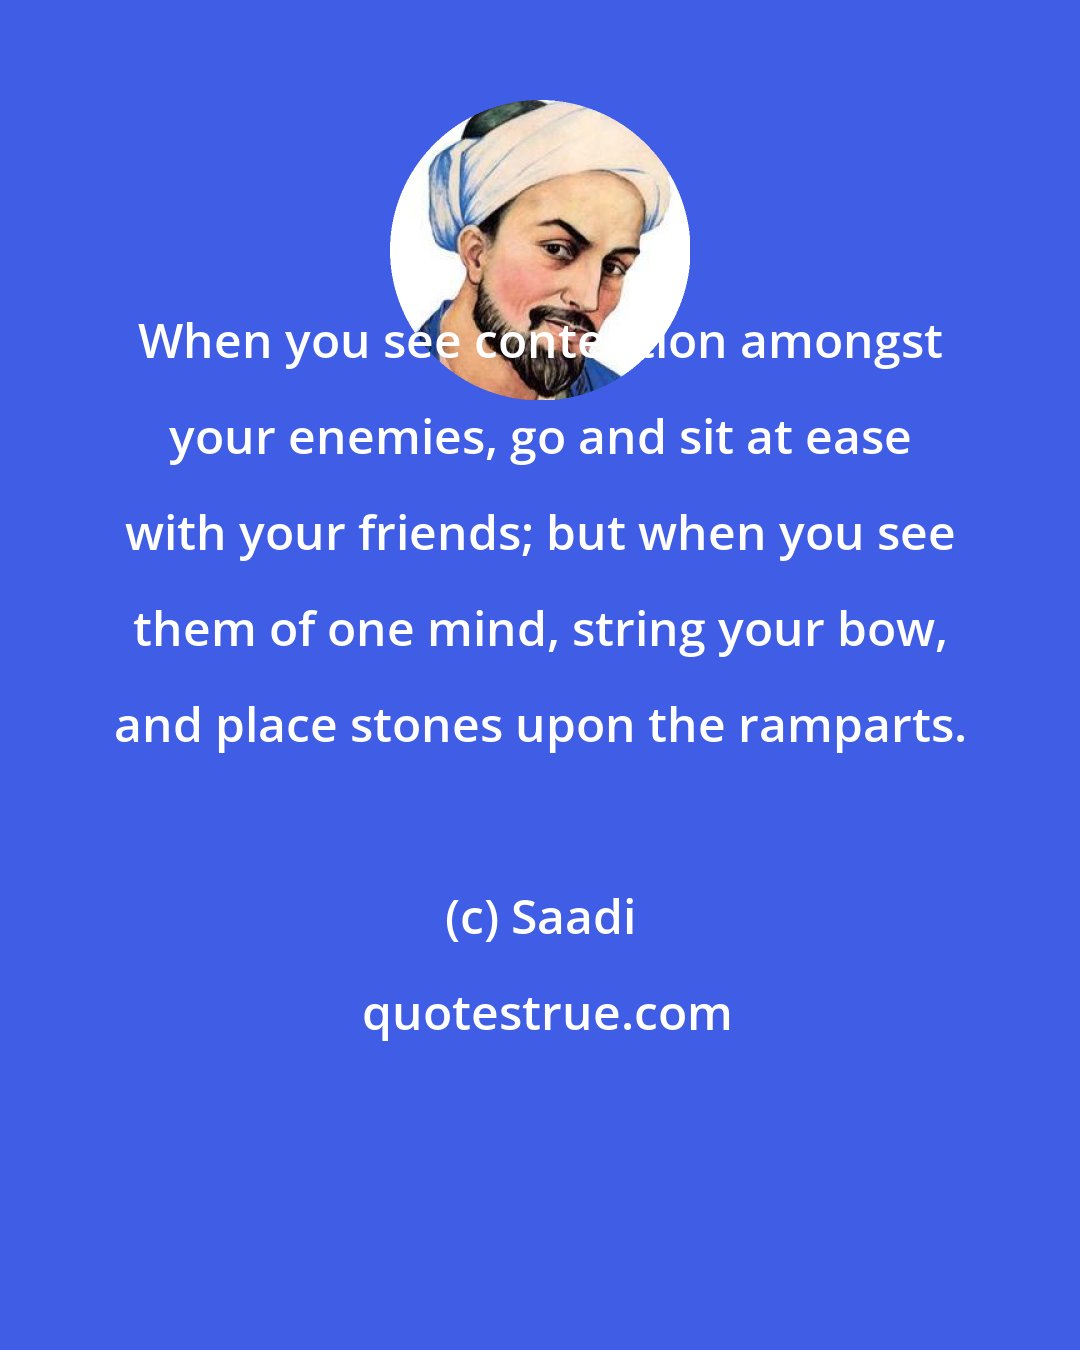 Saadi: When you see contention amongst your enemies, go and sit at ease with your friends; but when you see them of one mind, string your bow, and place stones upon the ramparts.